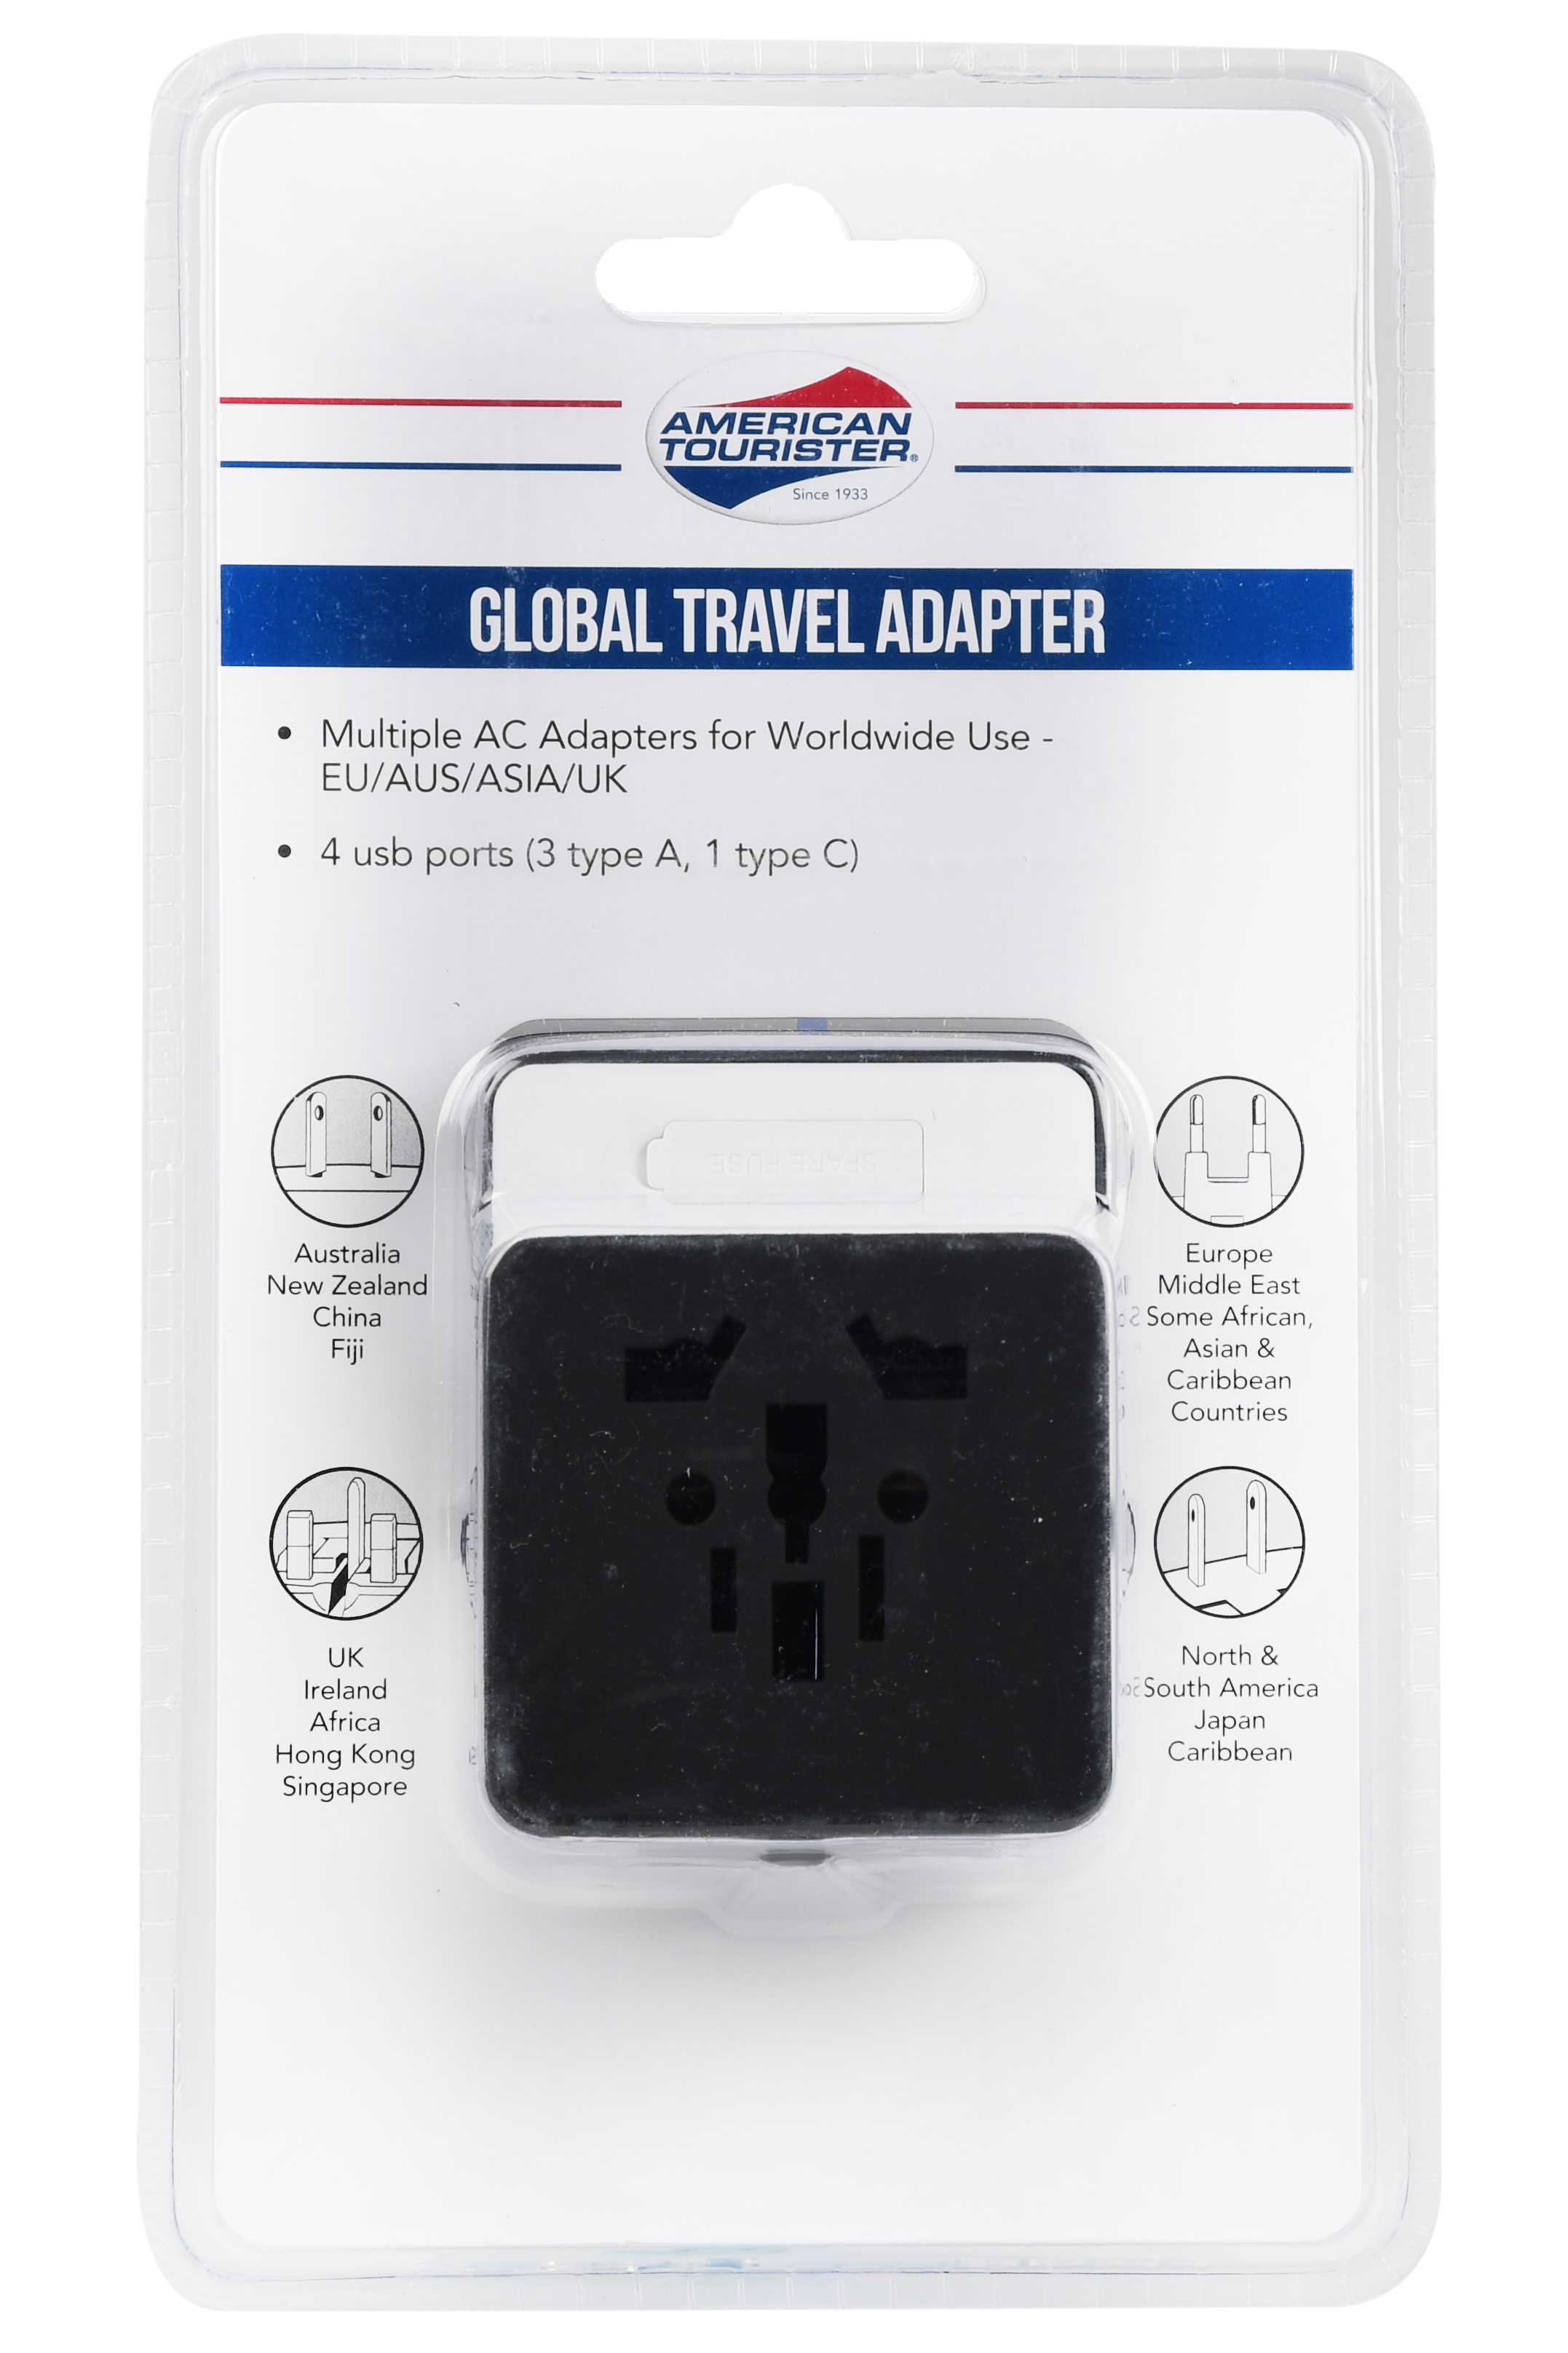 GLOBAL TRAVEL ADAPTER